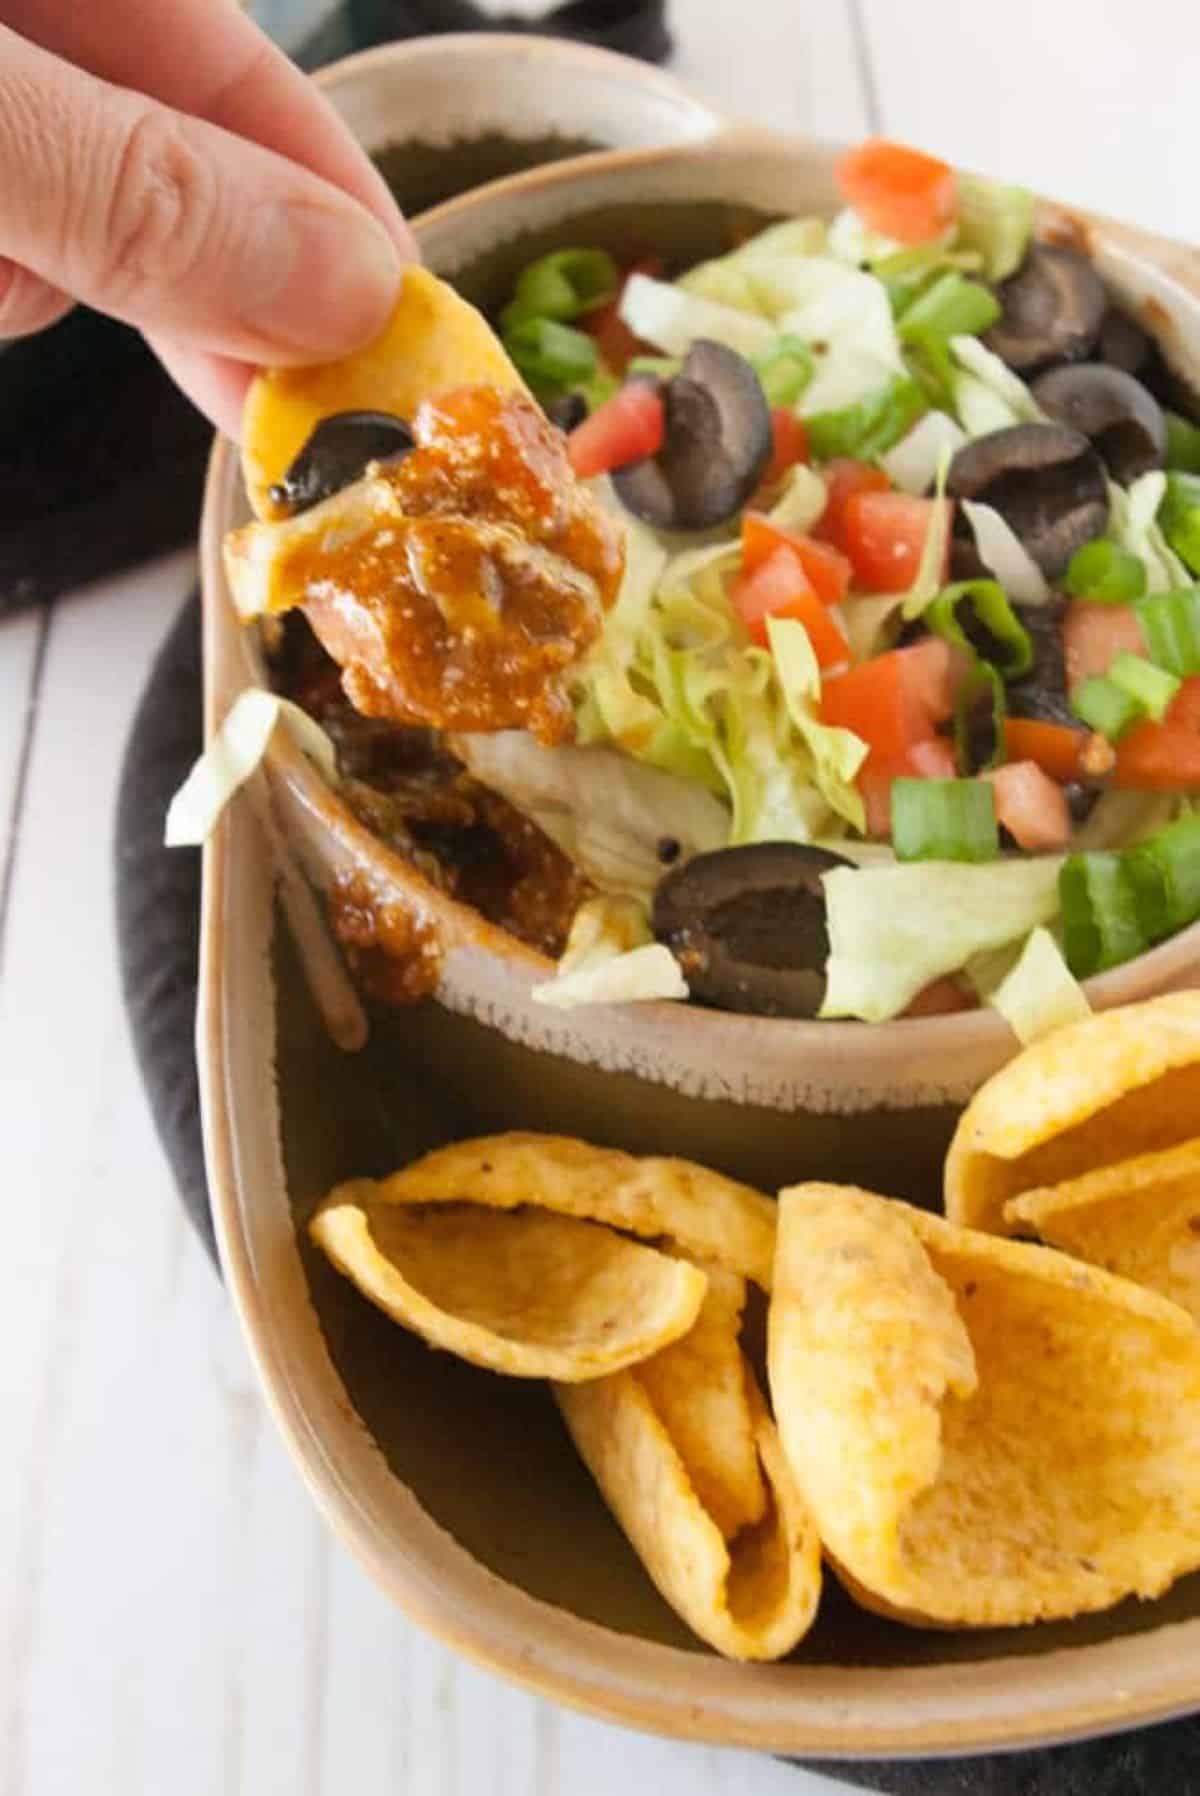 Chip dipped in a delicious Hot Taco Chili Dip held by hand.